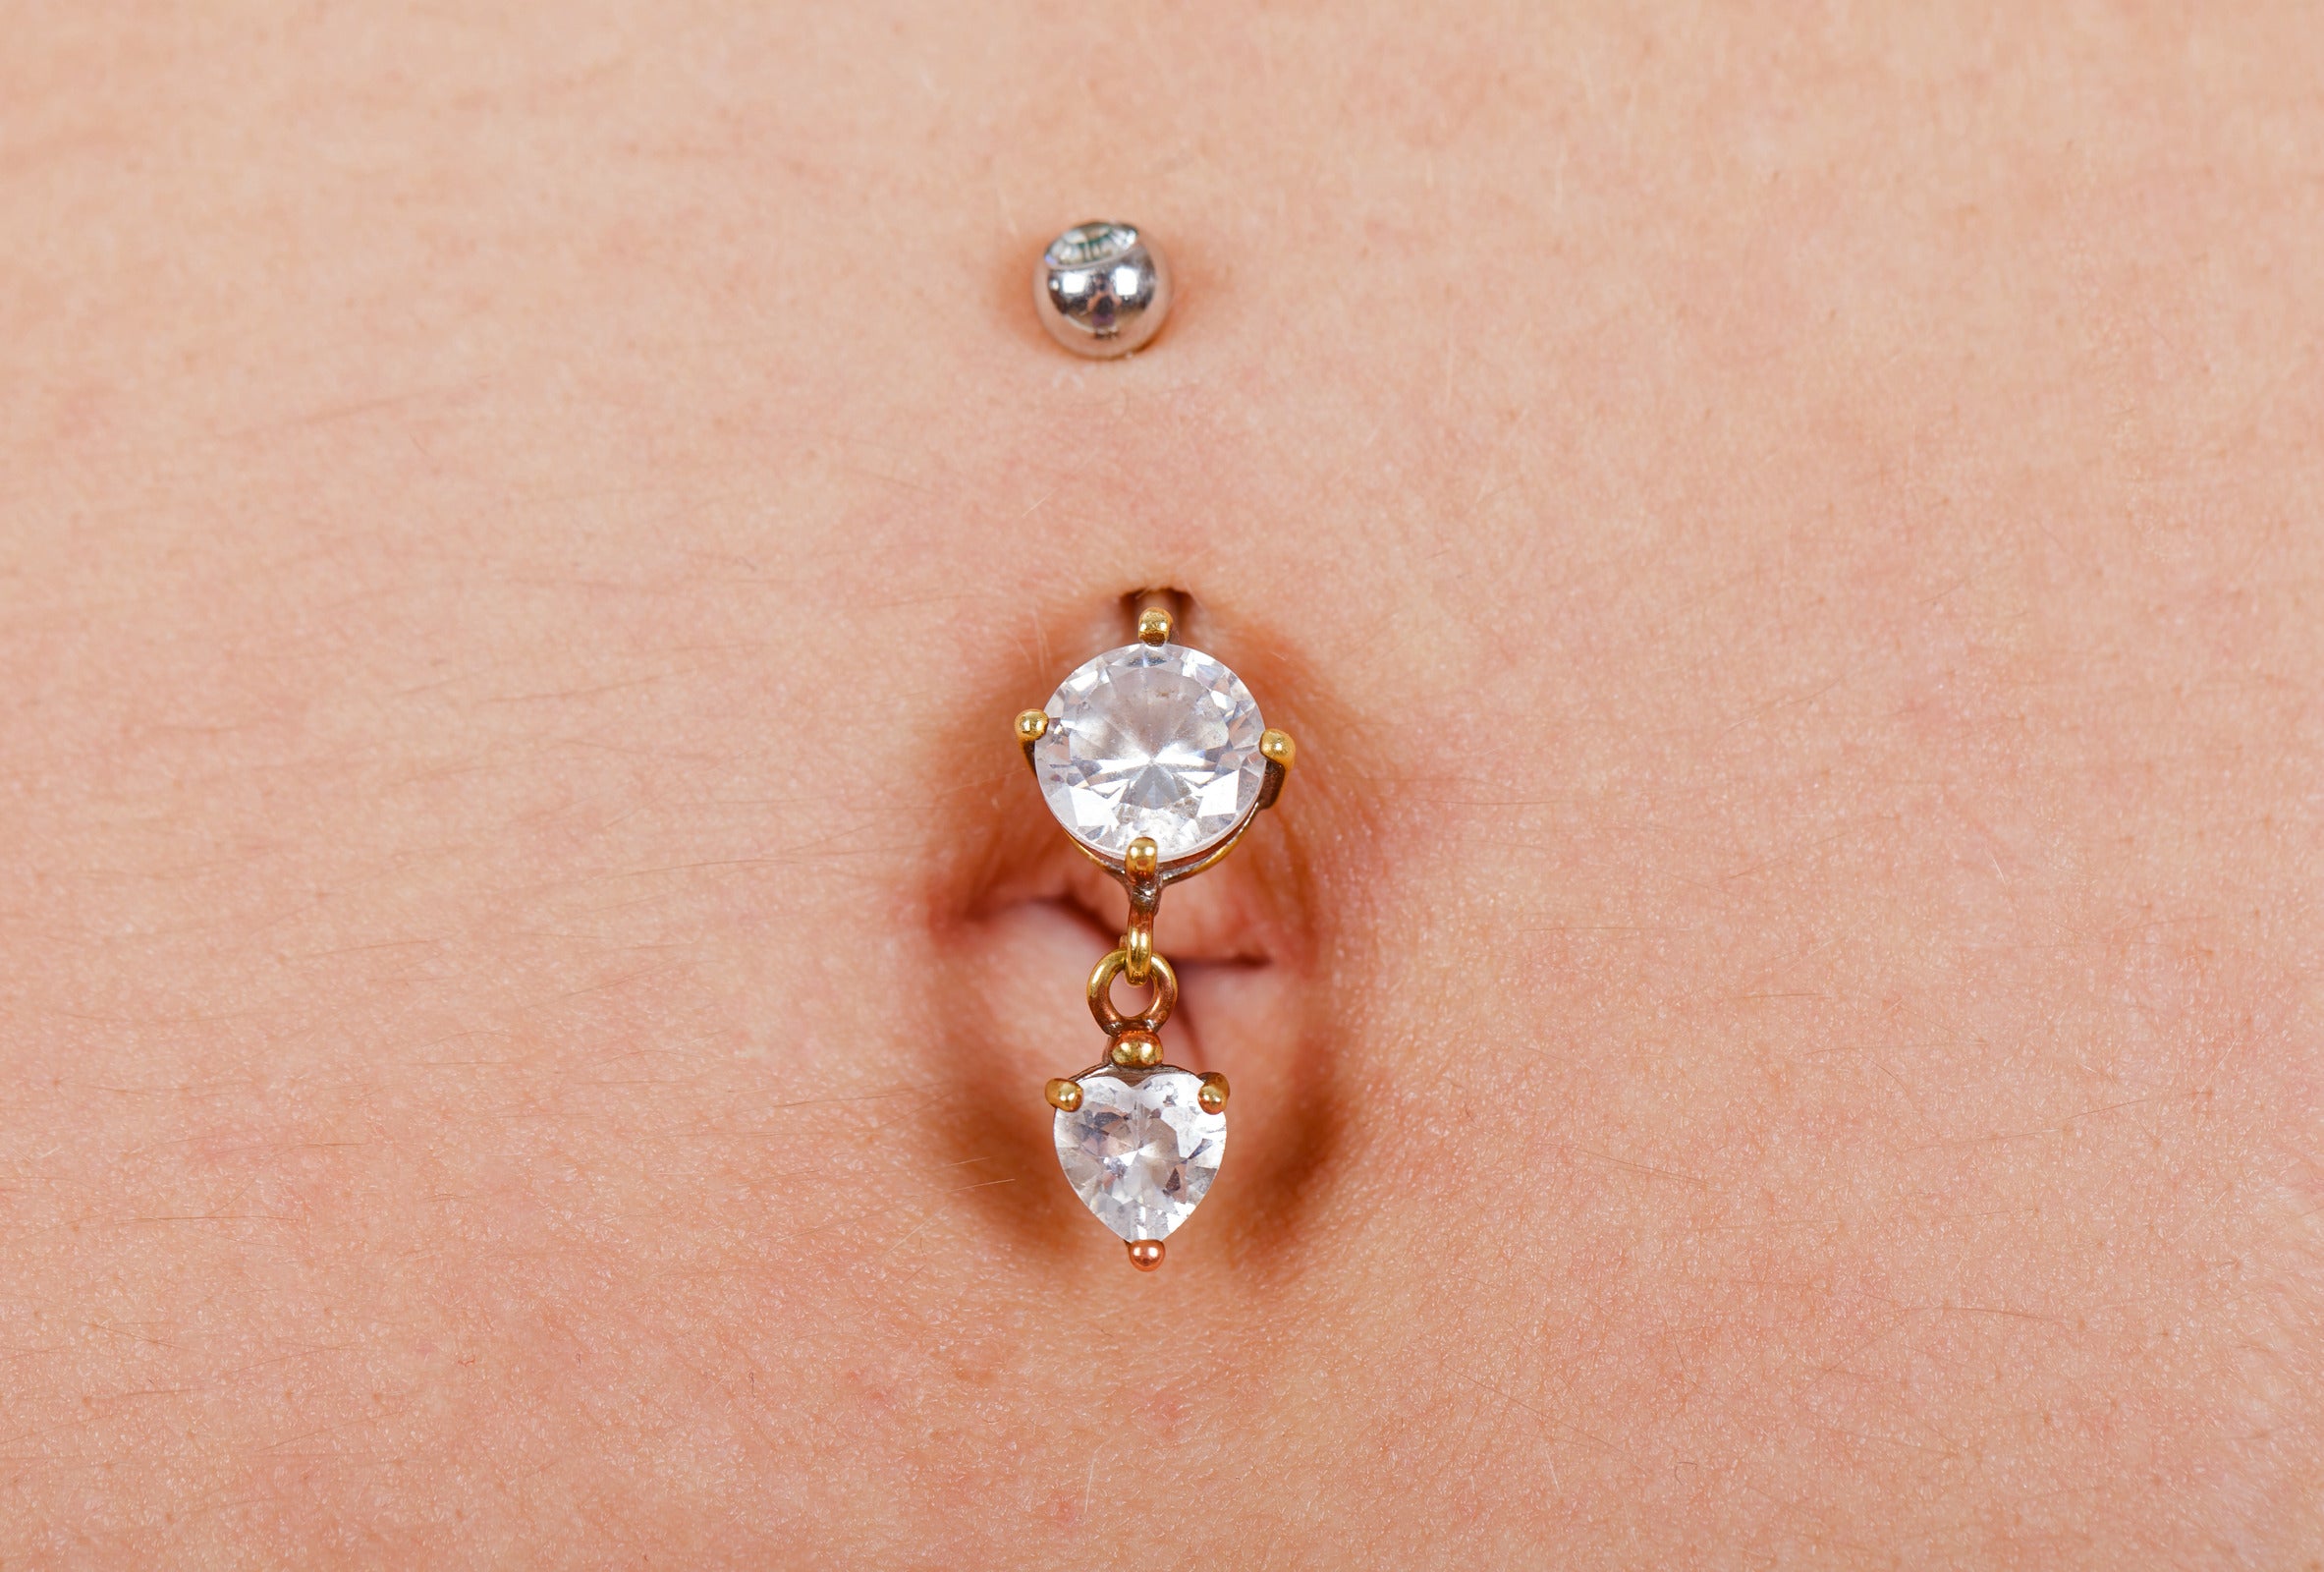 Can You Get a Belly Button Piercing With An Outie: 5 Factors